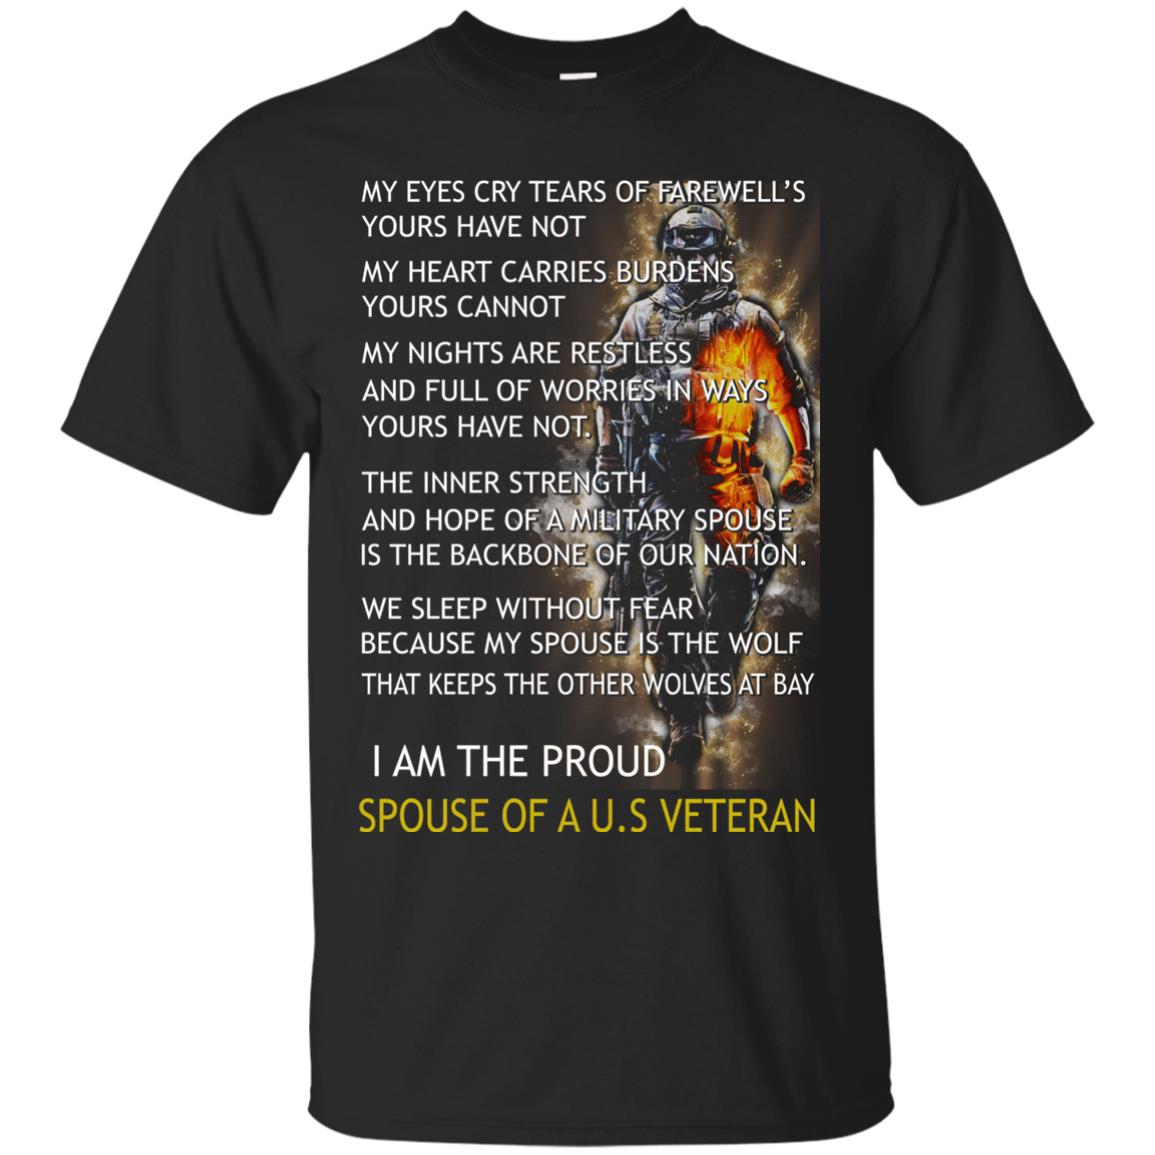 I am the proud spouse of a U.S Veteran, my eyes cry tears of farewell’s t shirt